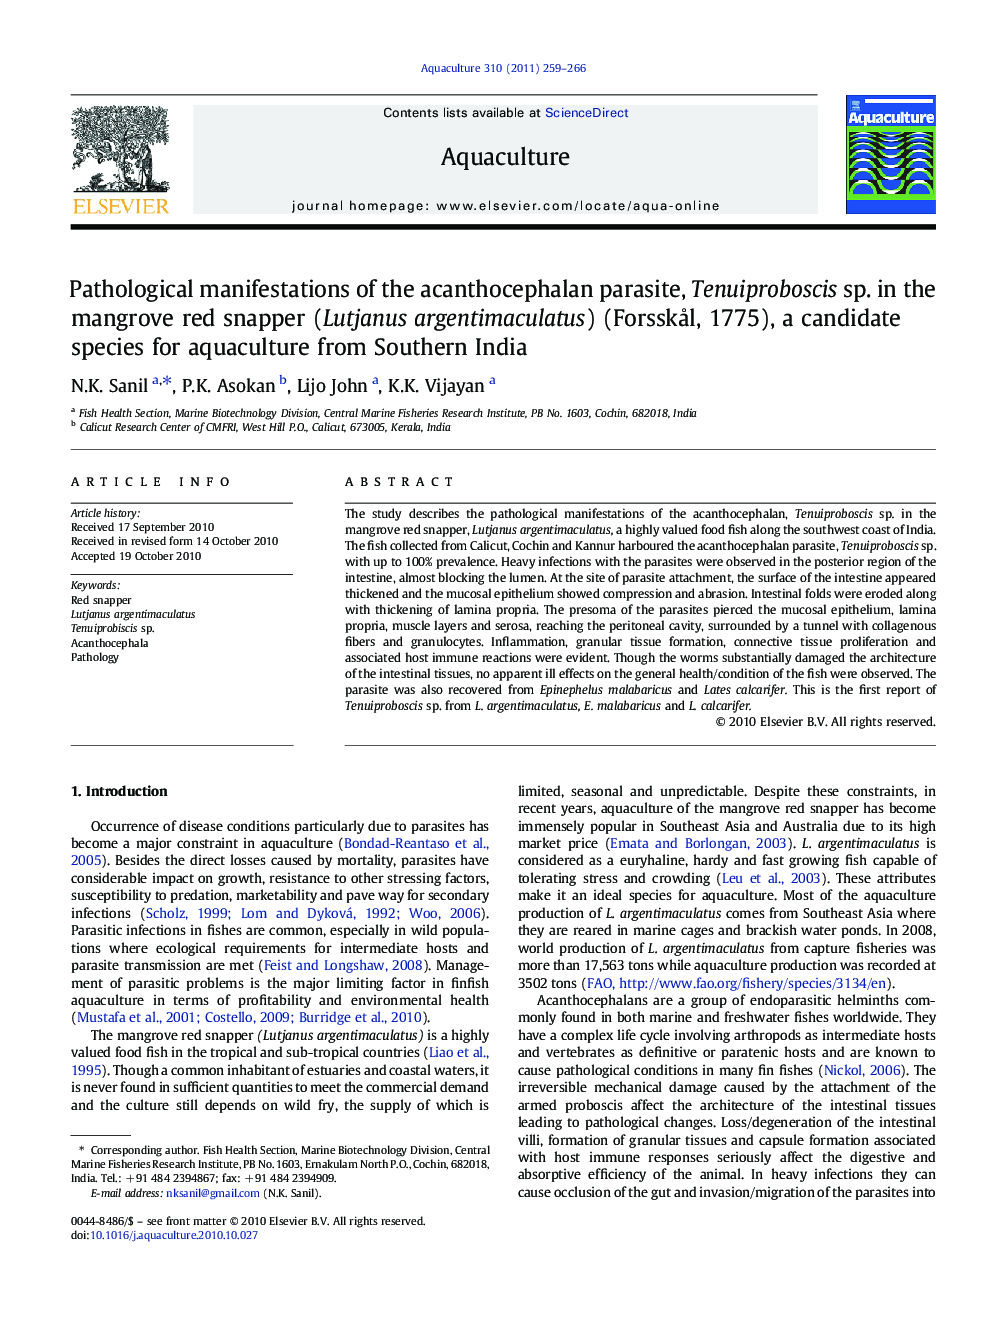 Pathological manifestations of the acanthocephalan parasite, Tenuiproboscis sp. in the mangrove red snapper (Lutjanus argentimaculatus) (Forsskål, 1775), a candidate species for aquaculture from Southern India